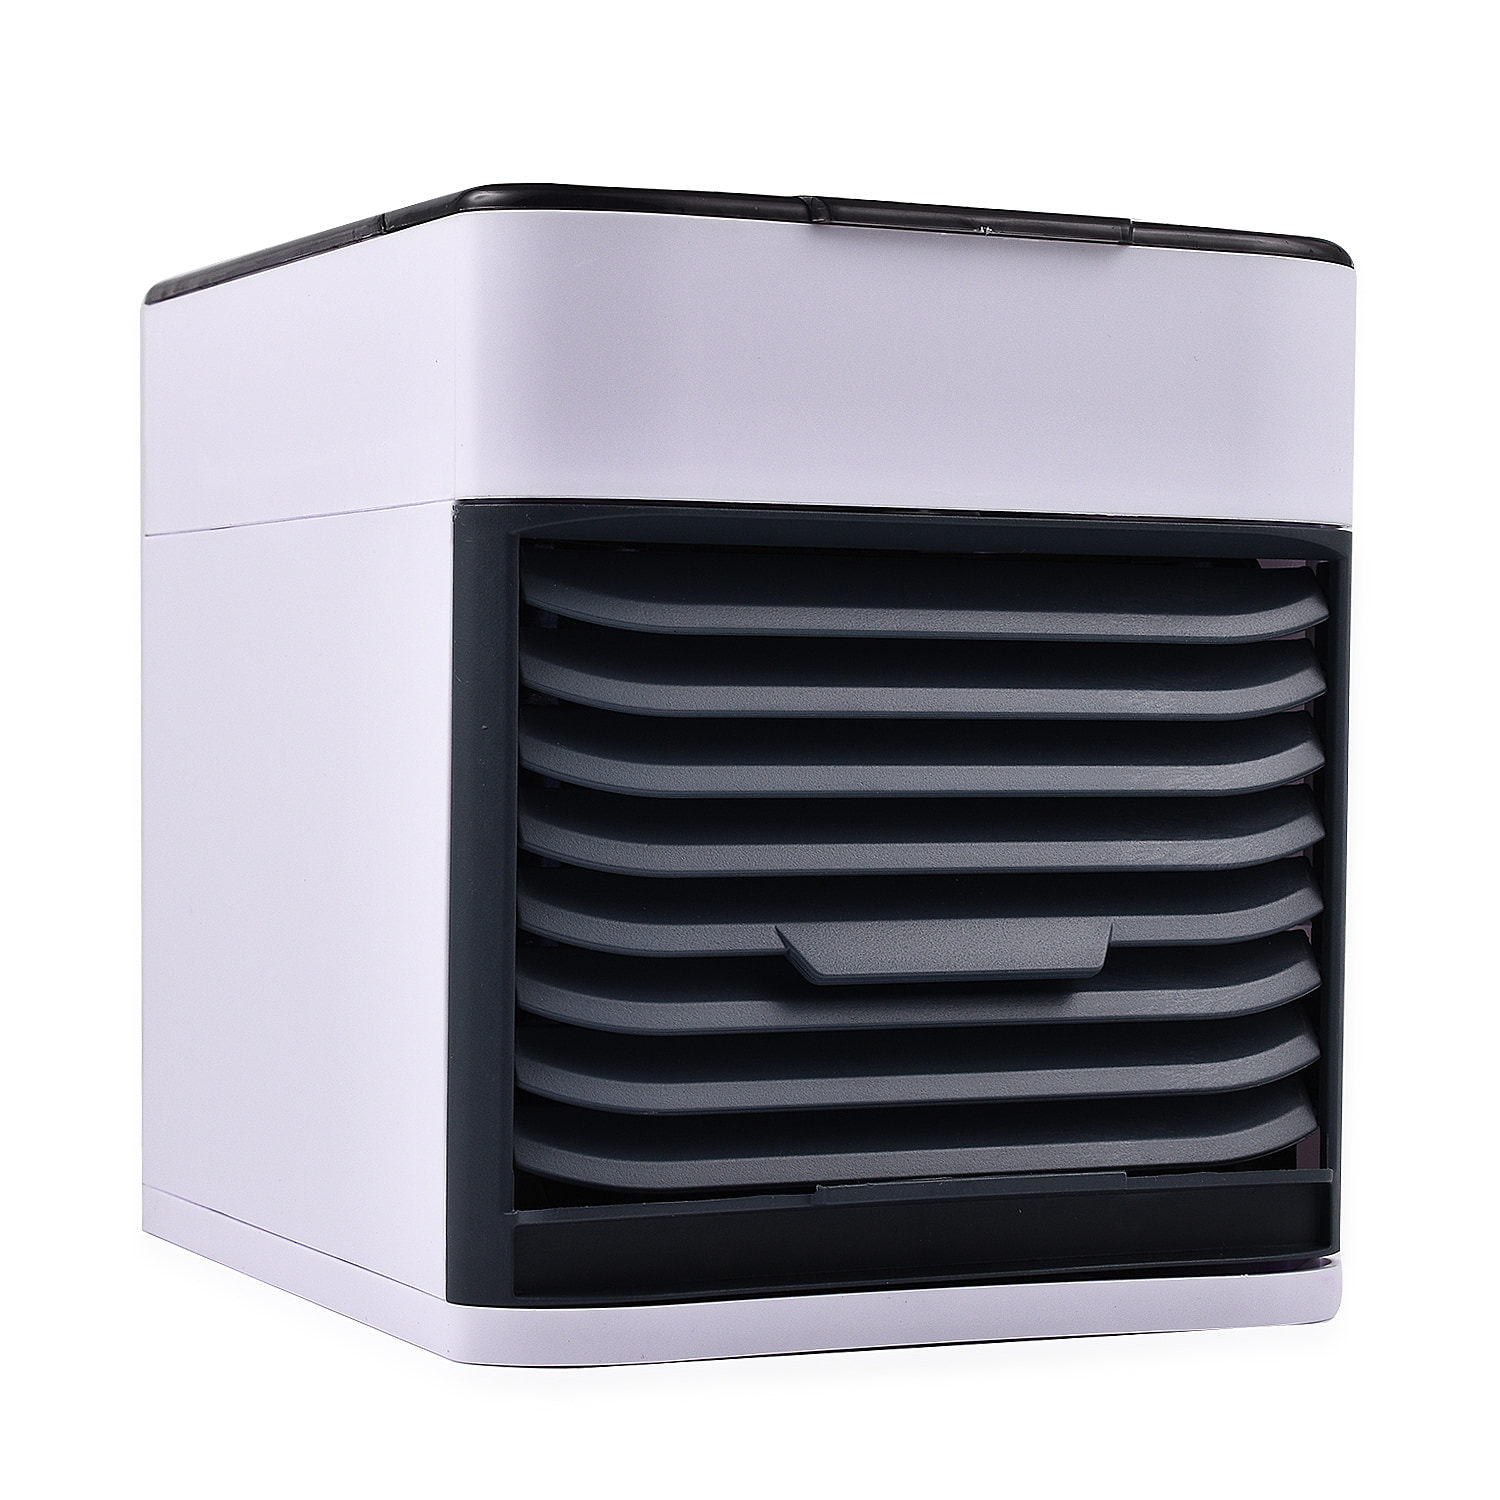 ARCTIC-AIR-Ultra-Evaporative-Air-Cooler-with-3-Speed-Control-and-LED-N